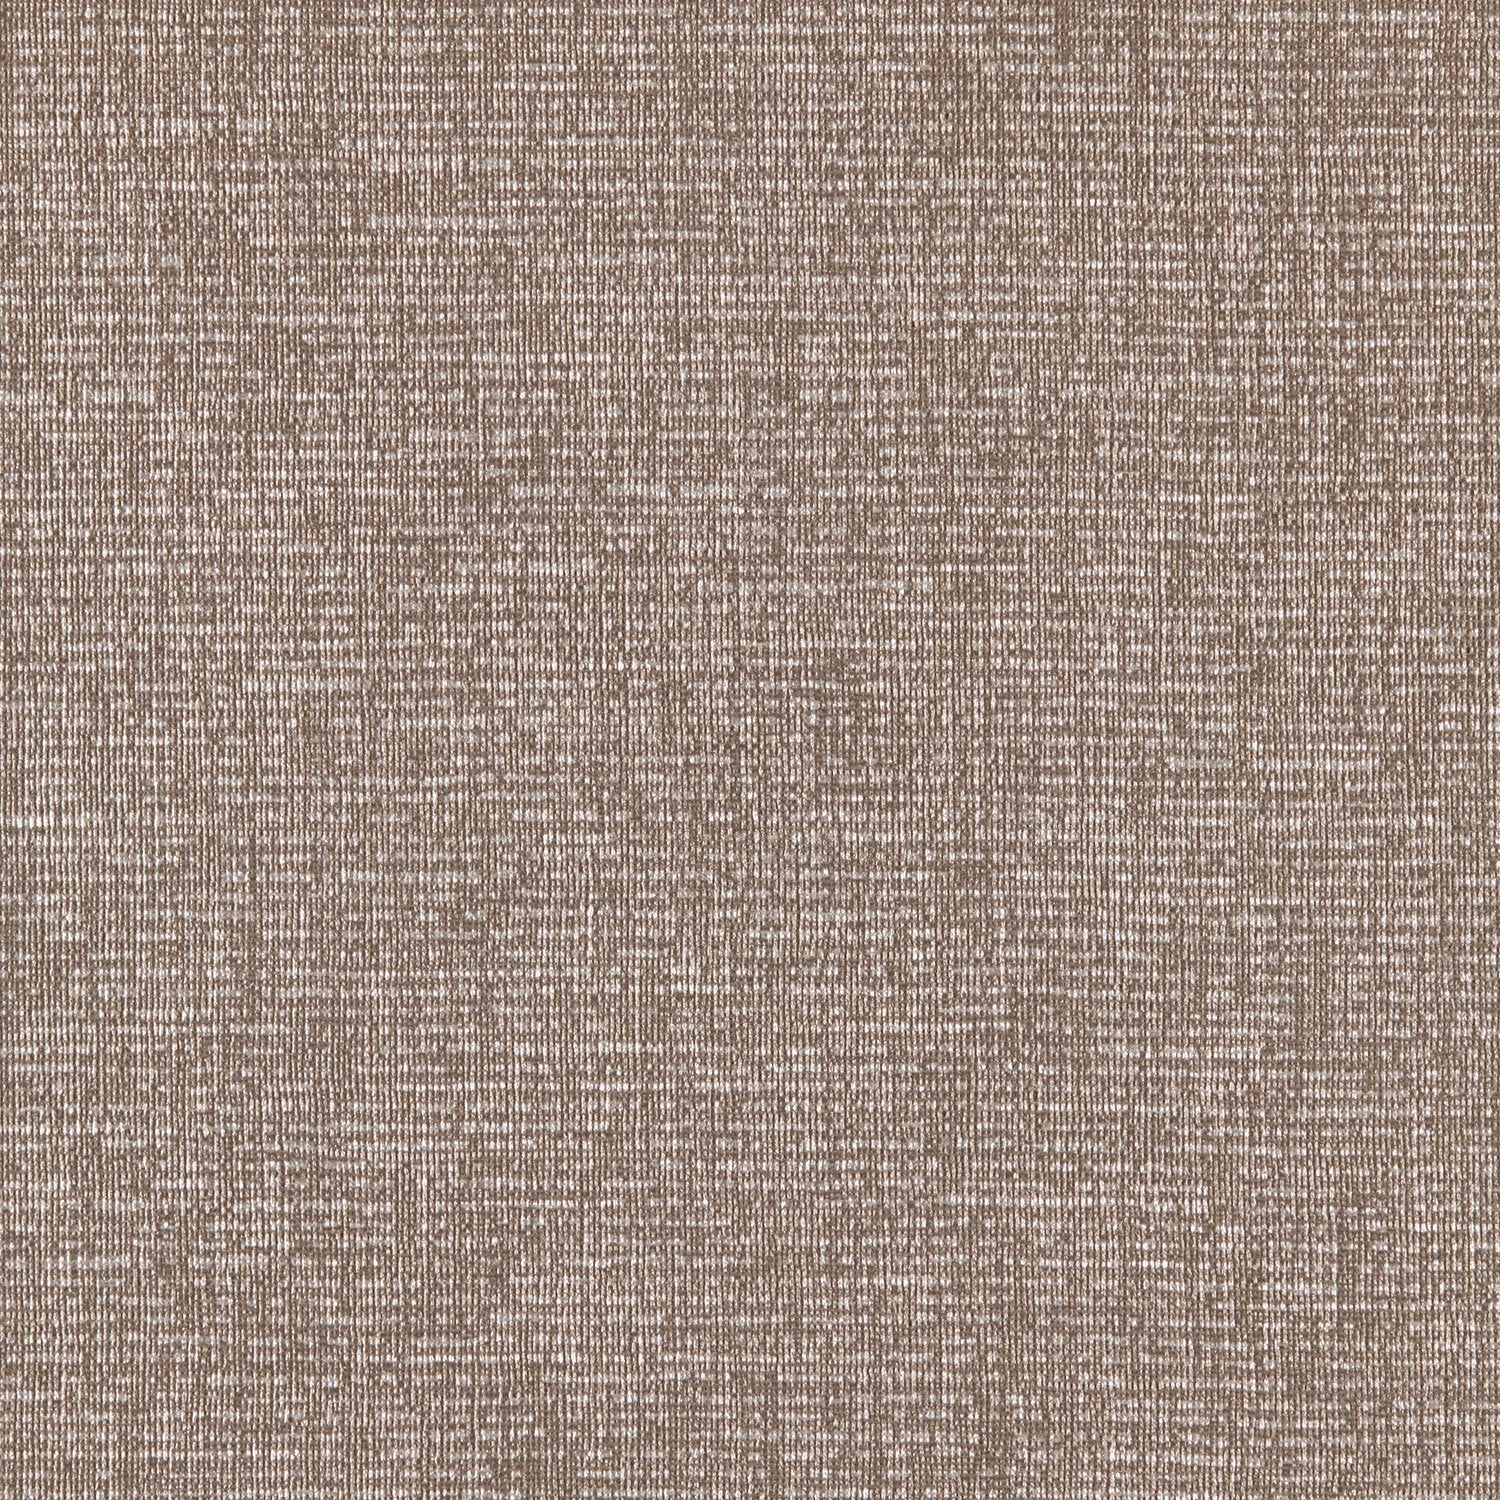 Spectrum - Y46915 - Wallcovering - Vycon - Kube Contract